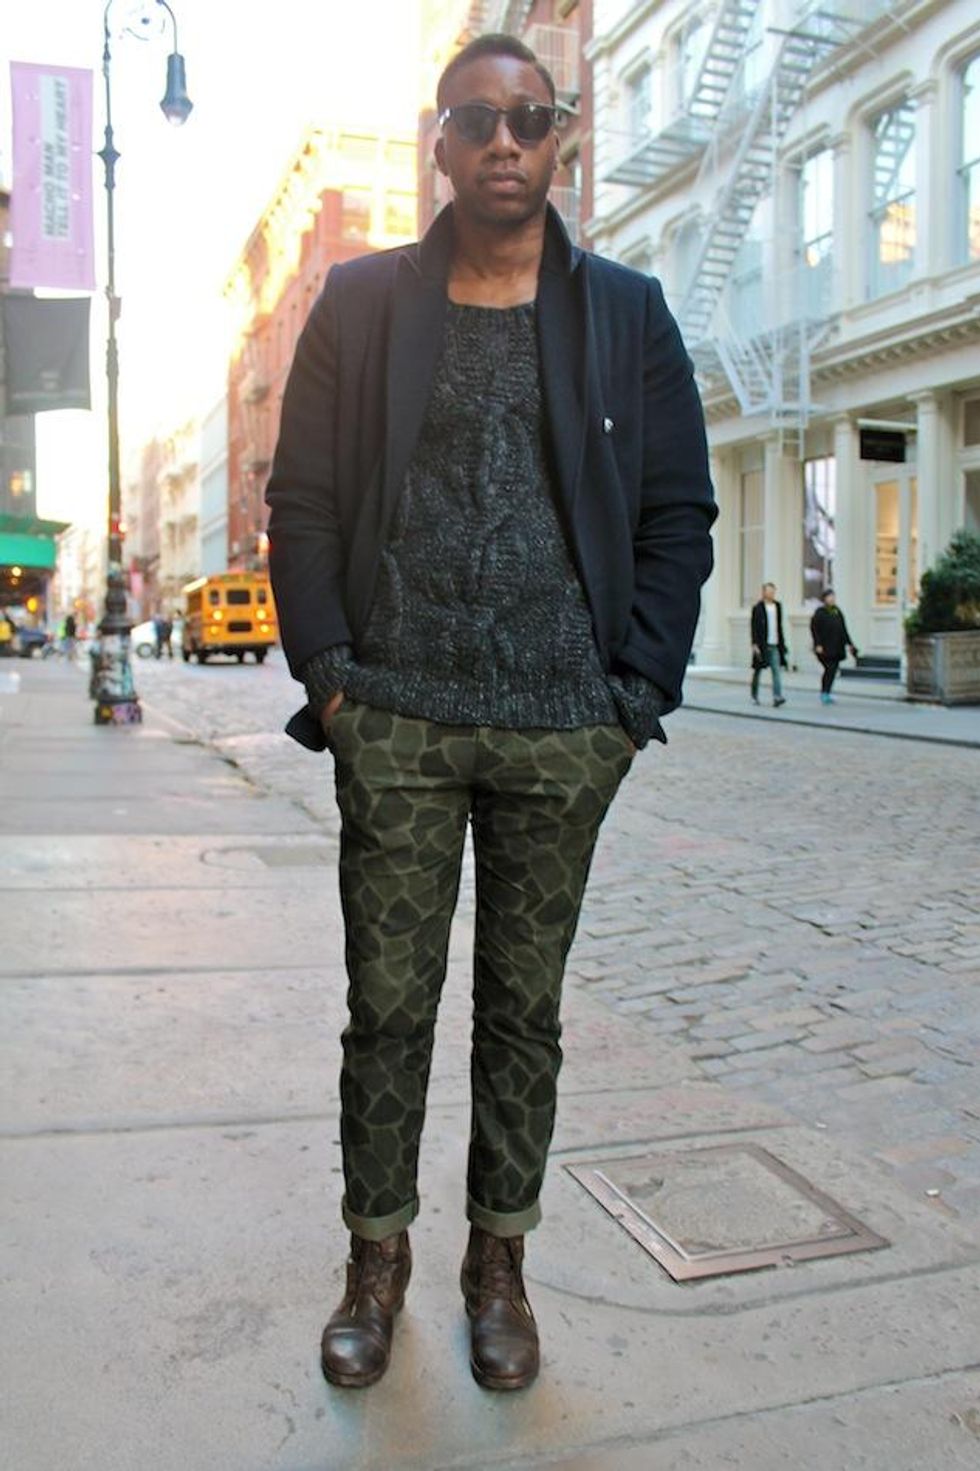 OUT On The Street: Camo Combo